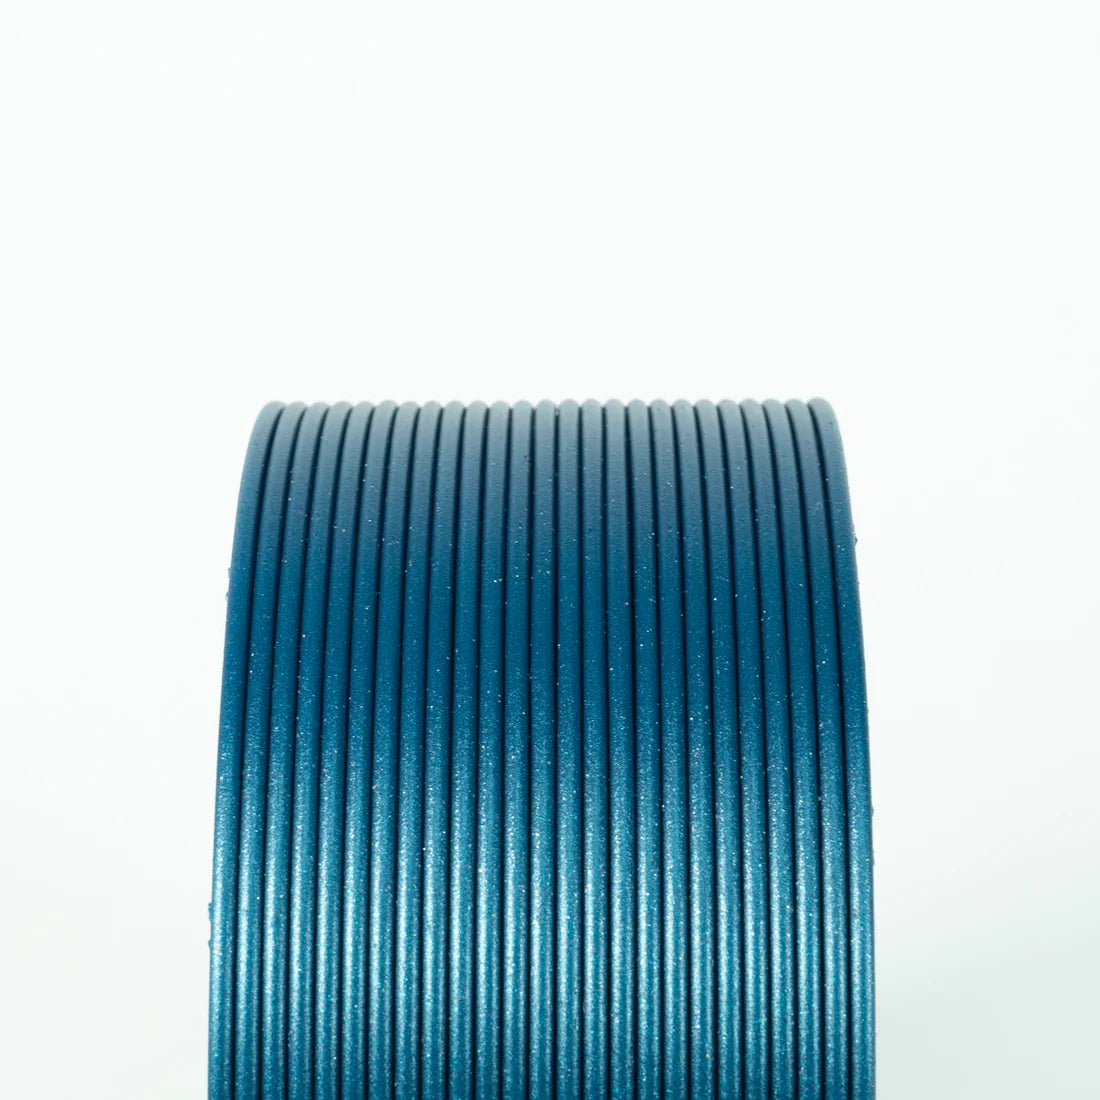 Protopasta Still Colorful Recycled PLA 000 - 1.75mm (1kg) - Teal